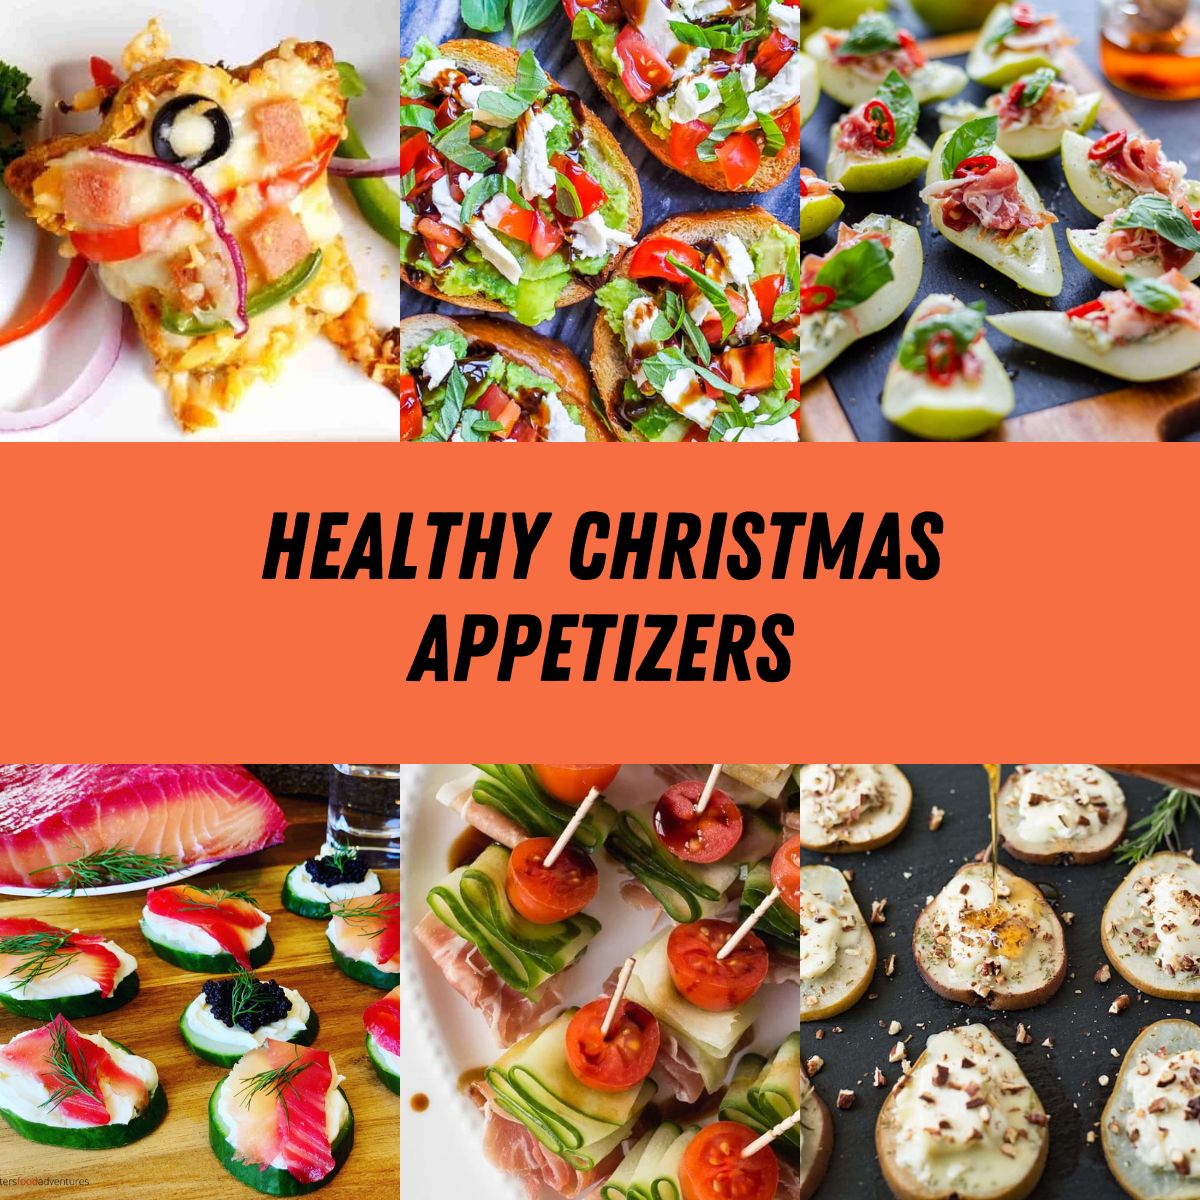 Thumbnail of healthy Christmas appetizers.